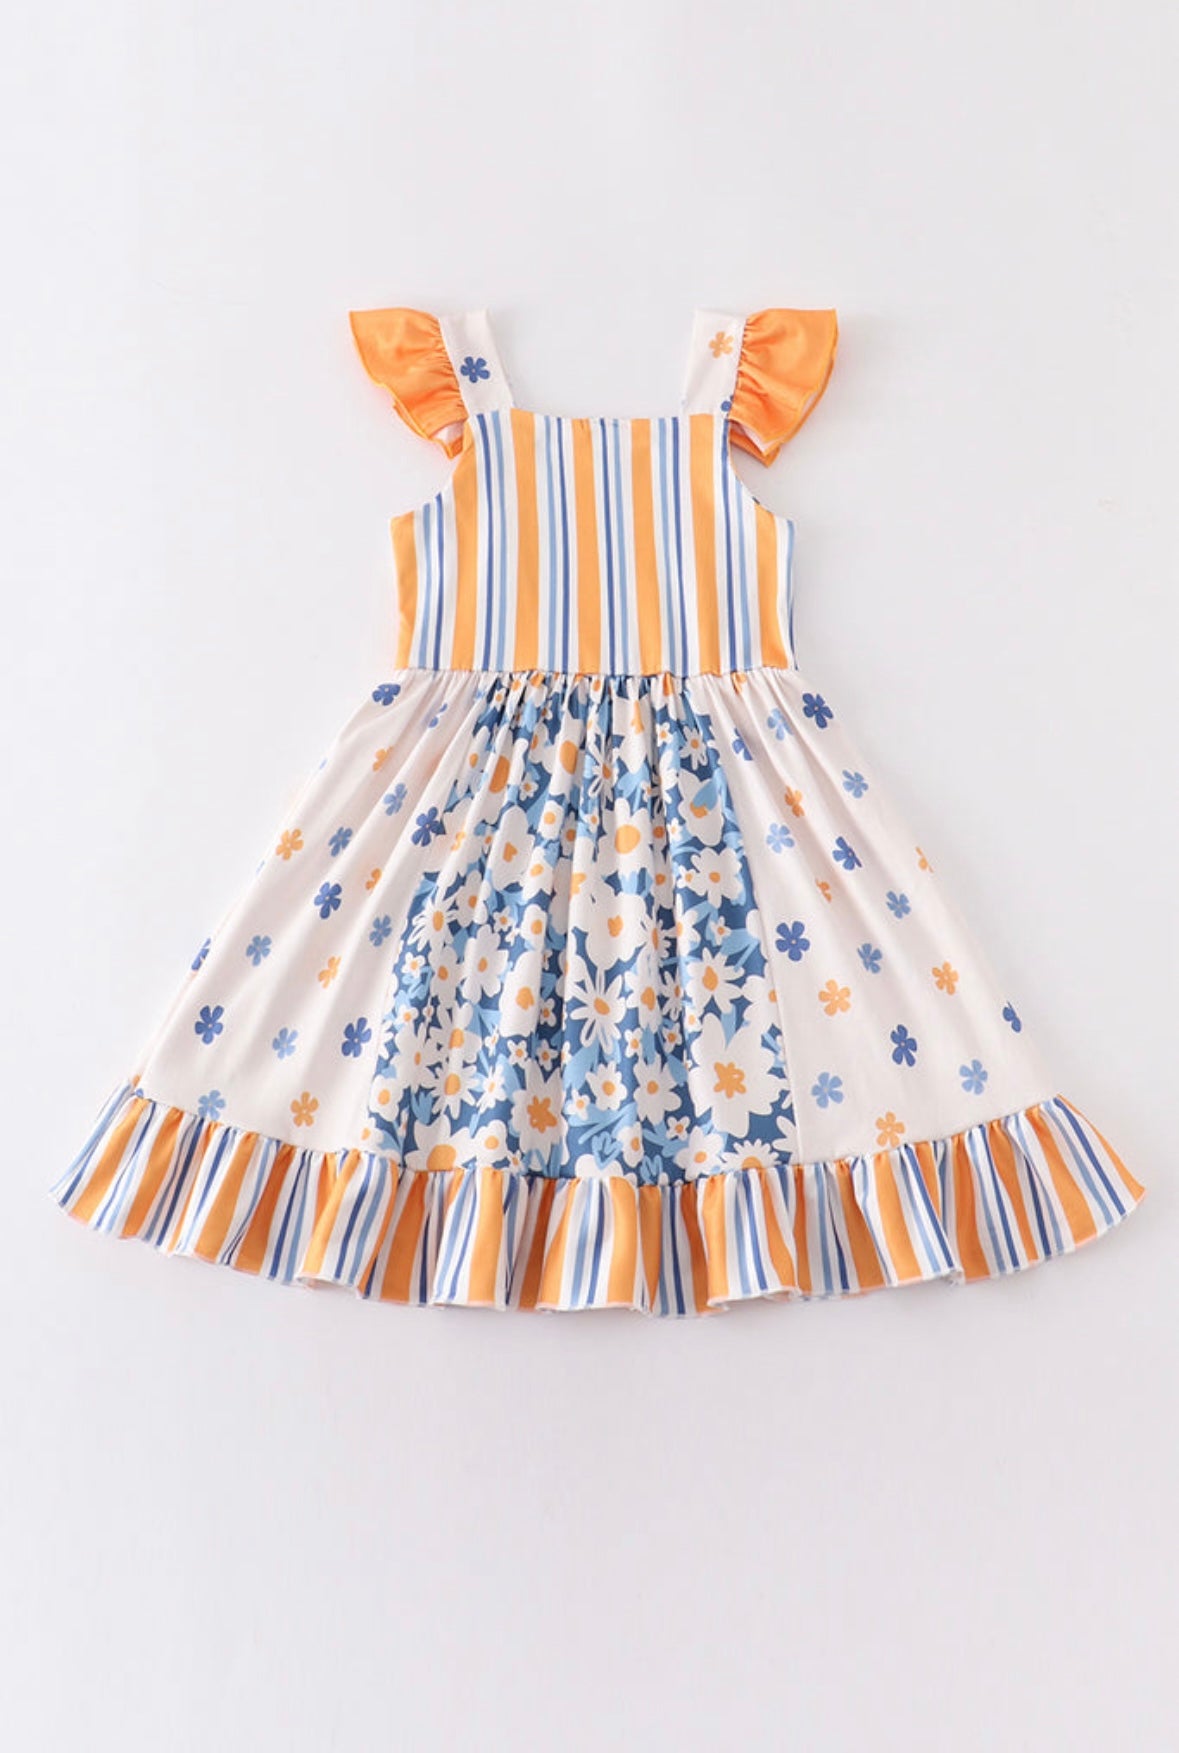 Spring Gold and Blue Daisy Dress (SIZE UP)